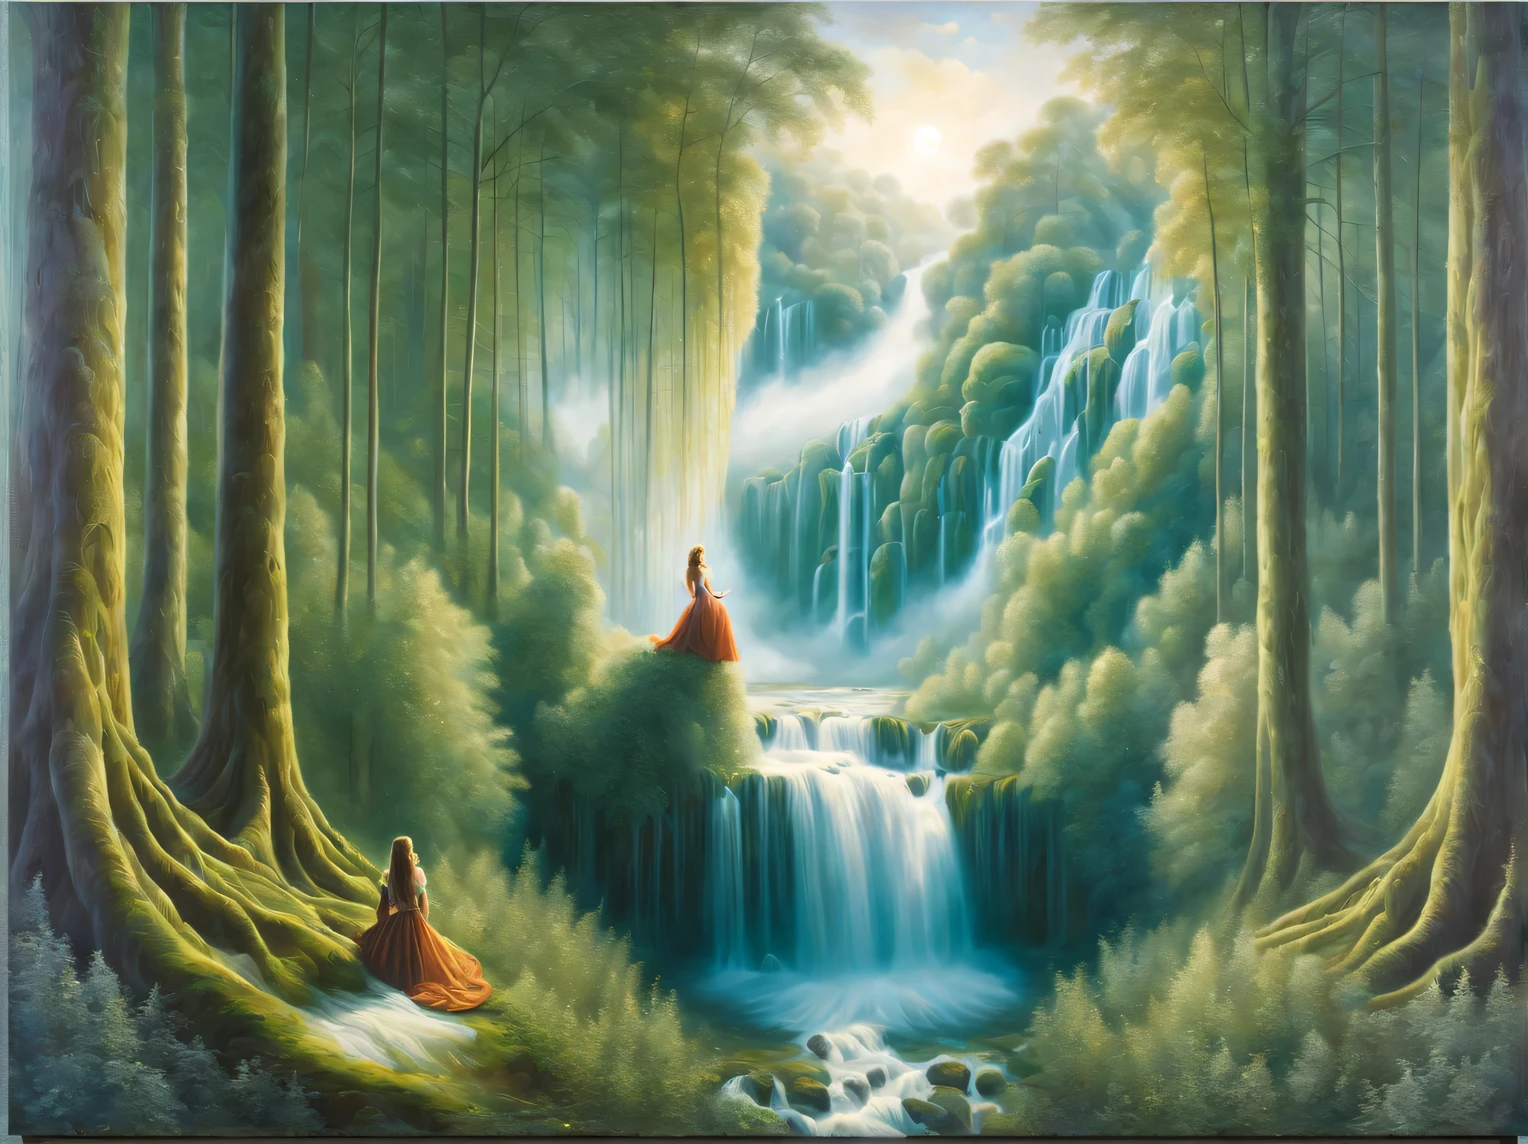 Oil painting on canvas Oil painting on canvas with double exposure effect, (in the foreground is the dreamy face of a beautiful elf with a wicker floral wreath on her head), (in the background there is a landscape of a beautiful forest waterfall under the morning sun), High detail, A high resolution, maximum realism, Hugh Douglas Hamilton, Alexey Savrasov, Fedor Vasiliev, Rob Gonsalves, Peder Monstead,